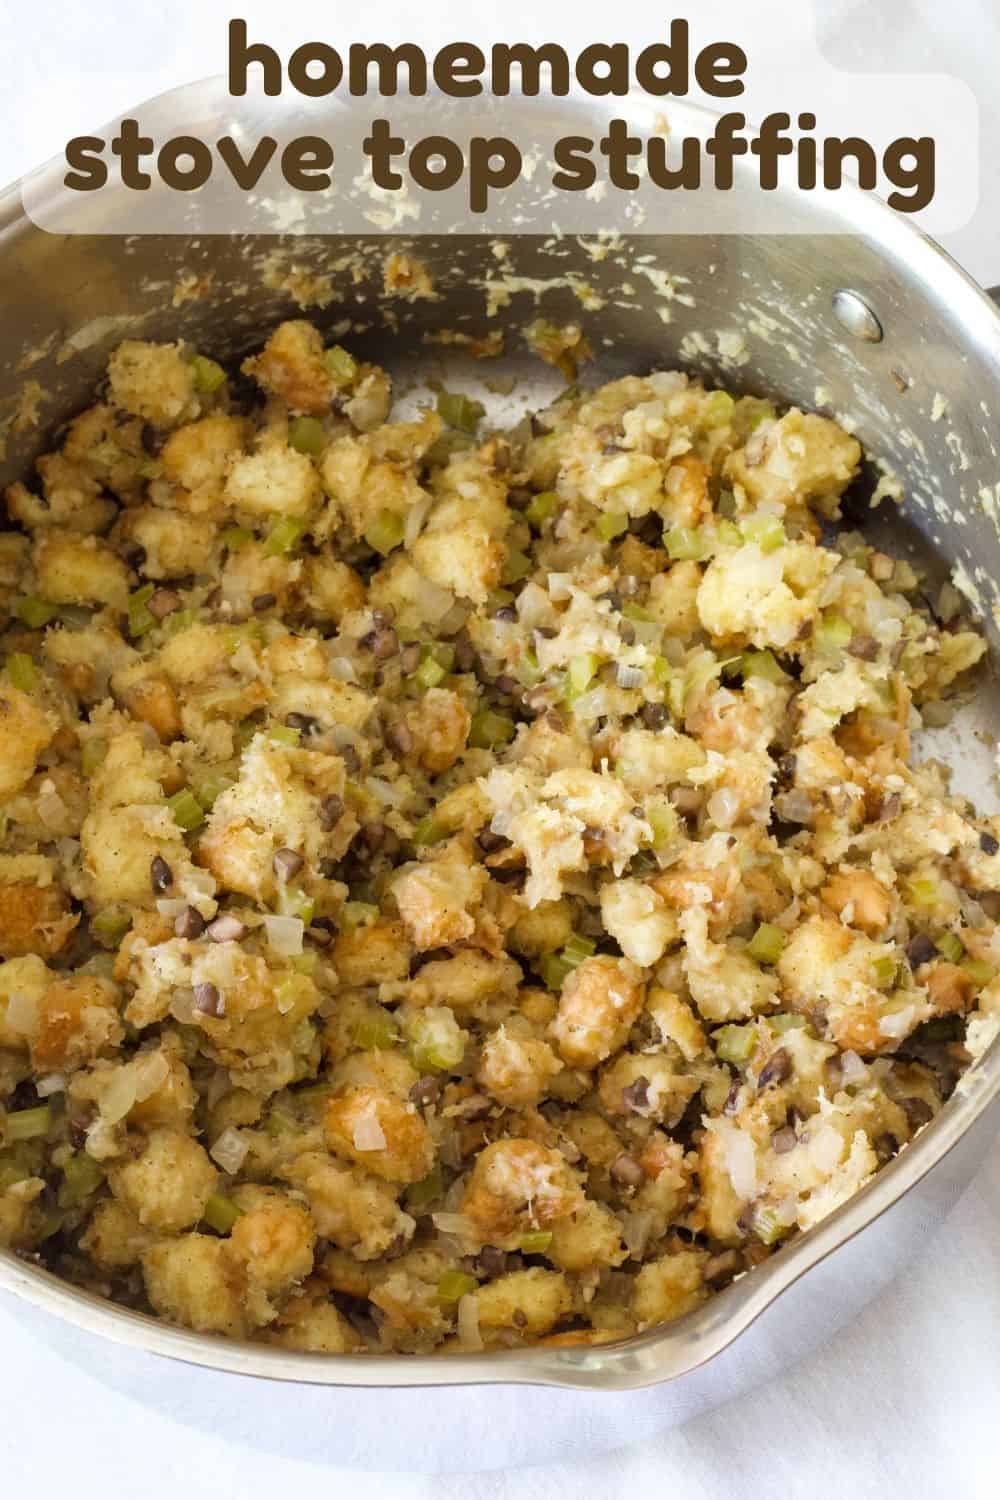 I tried 4 different kinds of boxed stuffing from the grocery store